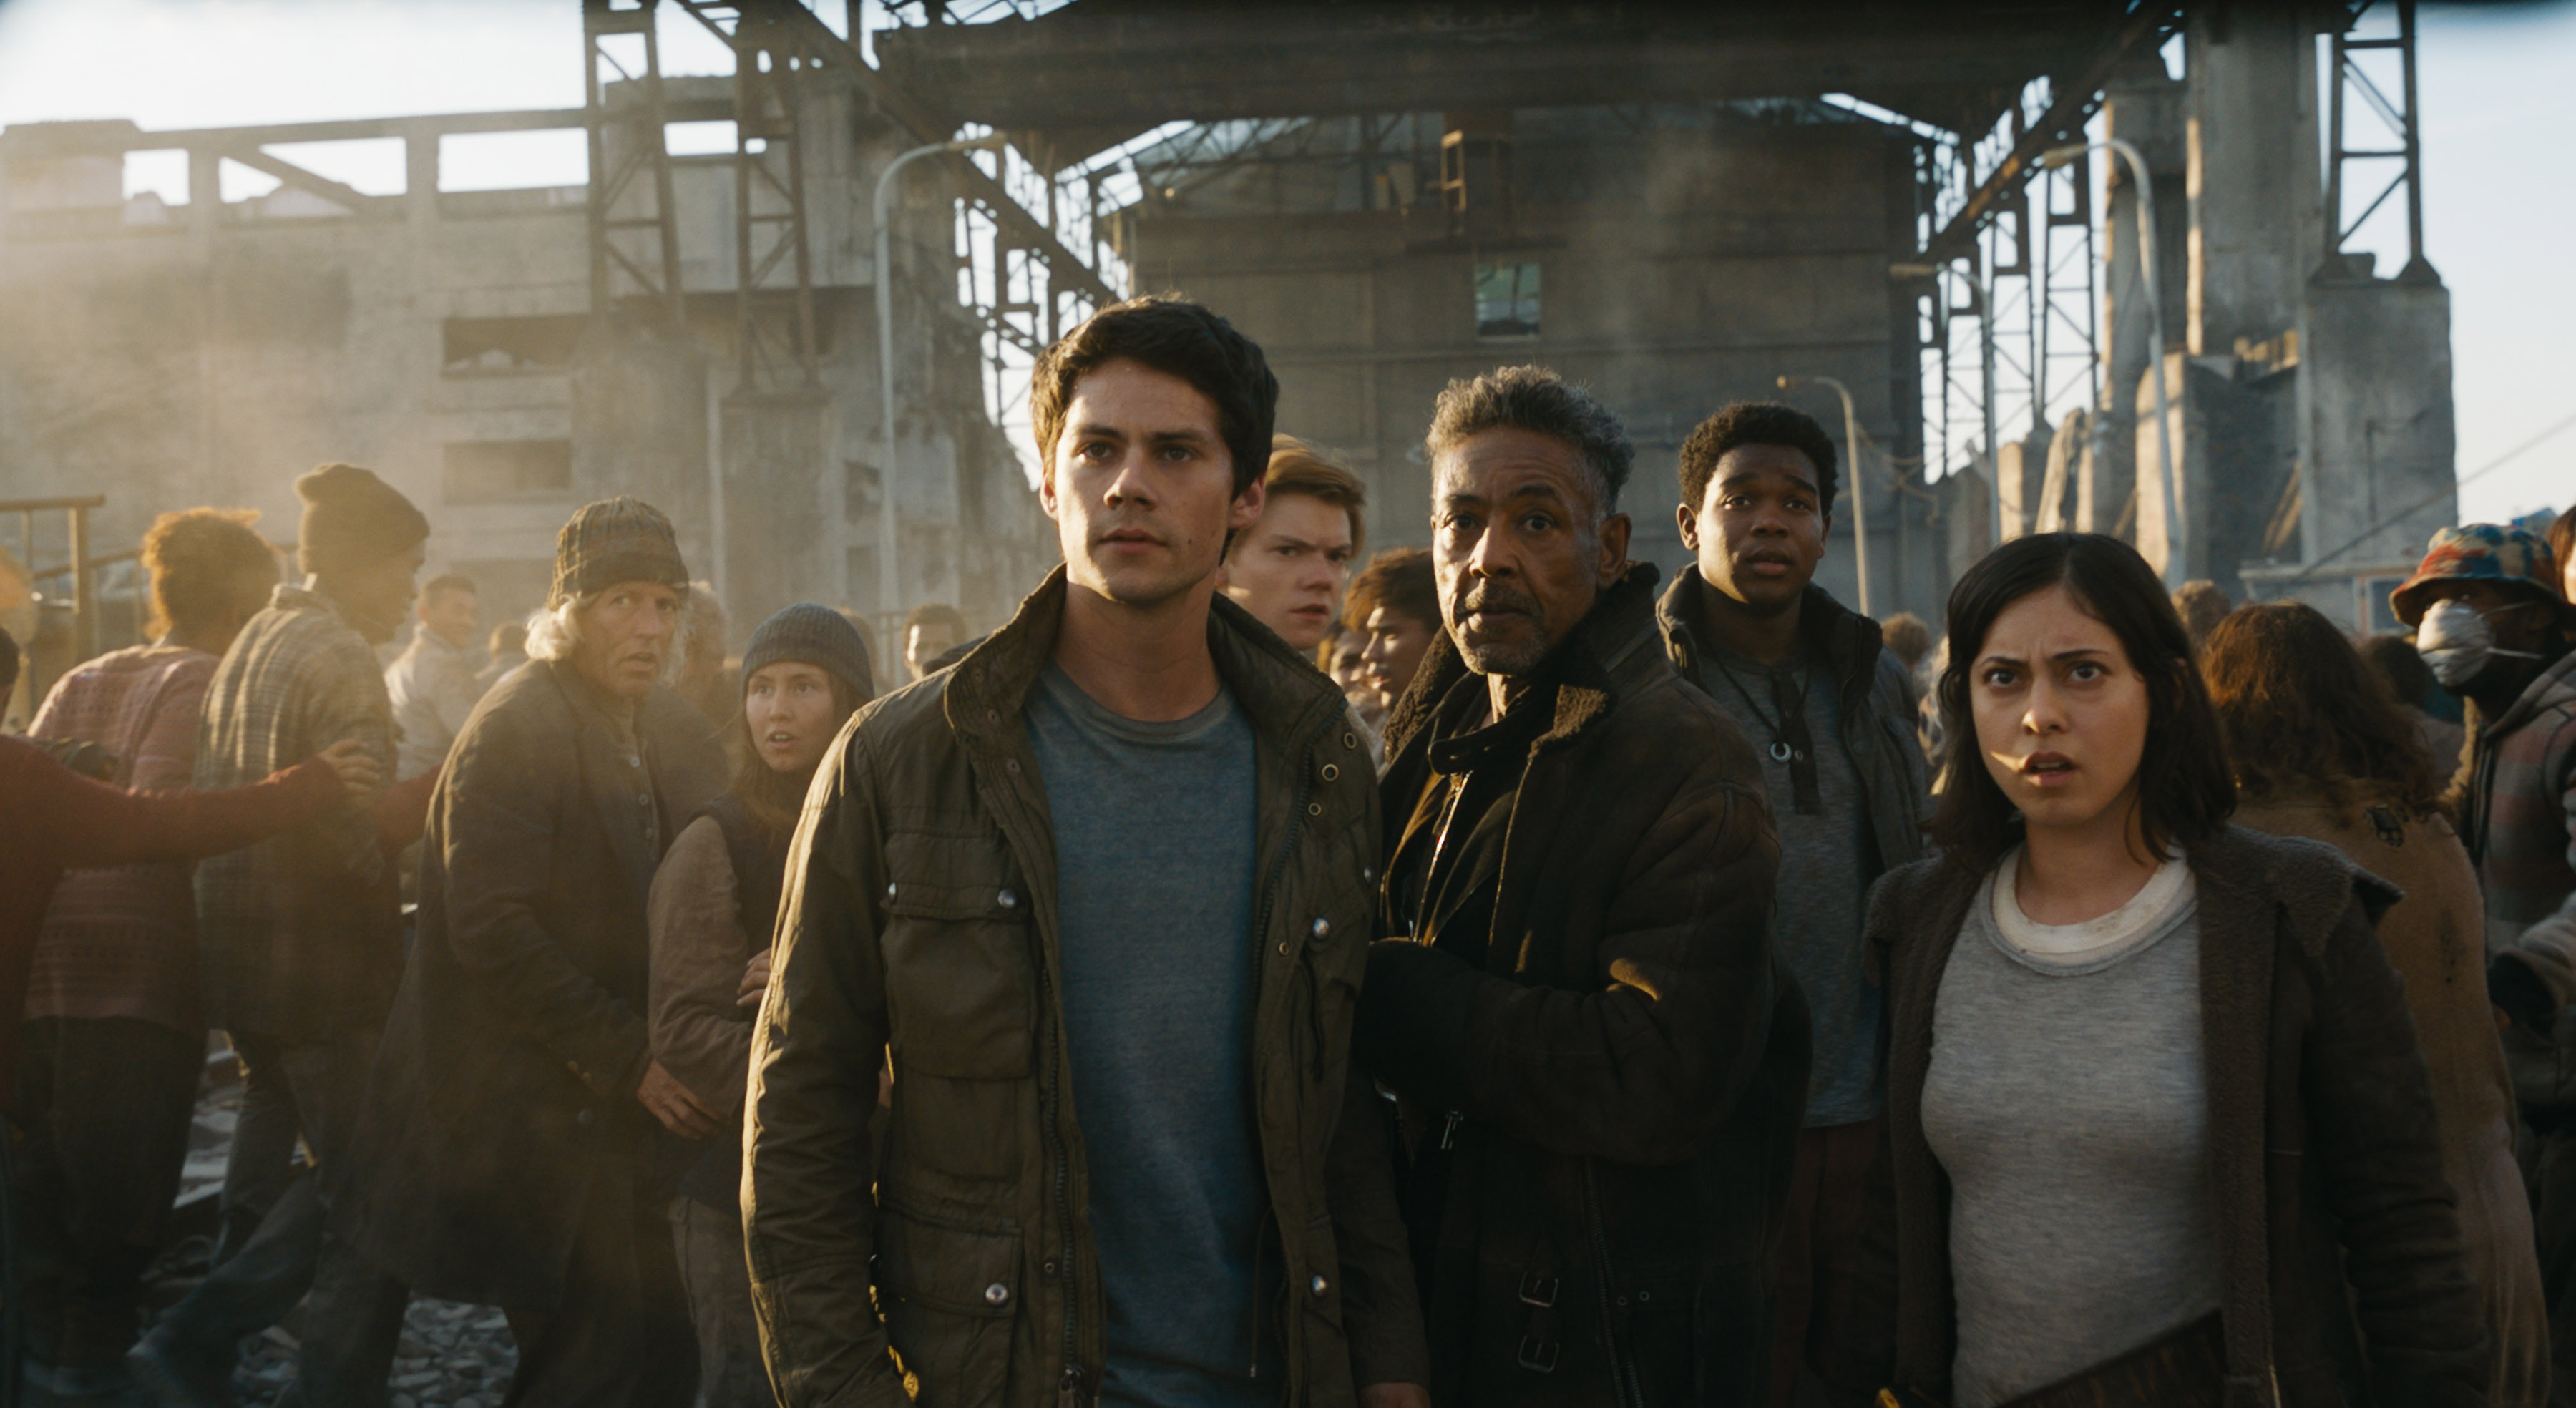 Review for the new sci-fi thriller sequel MAZE RUNNER: THE DEATH CURE, opening in theatres January 26th 2018. | Review for the new sci-fi thriller sequel MAZE RUNNER: THE DEATH CURE, opening in theatres January 26th 2018.